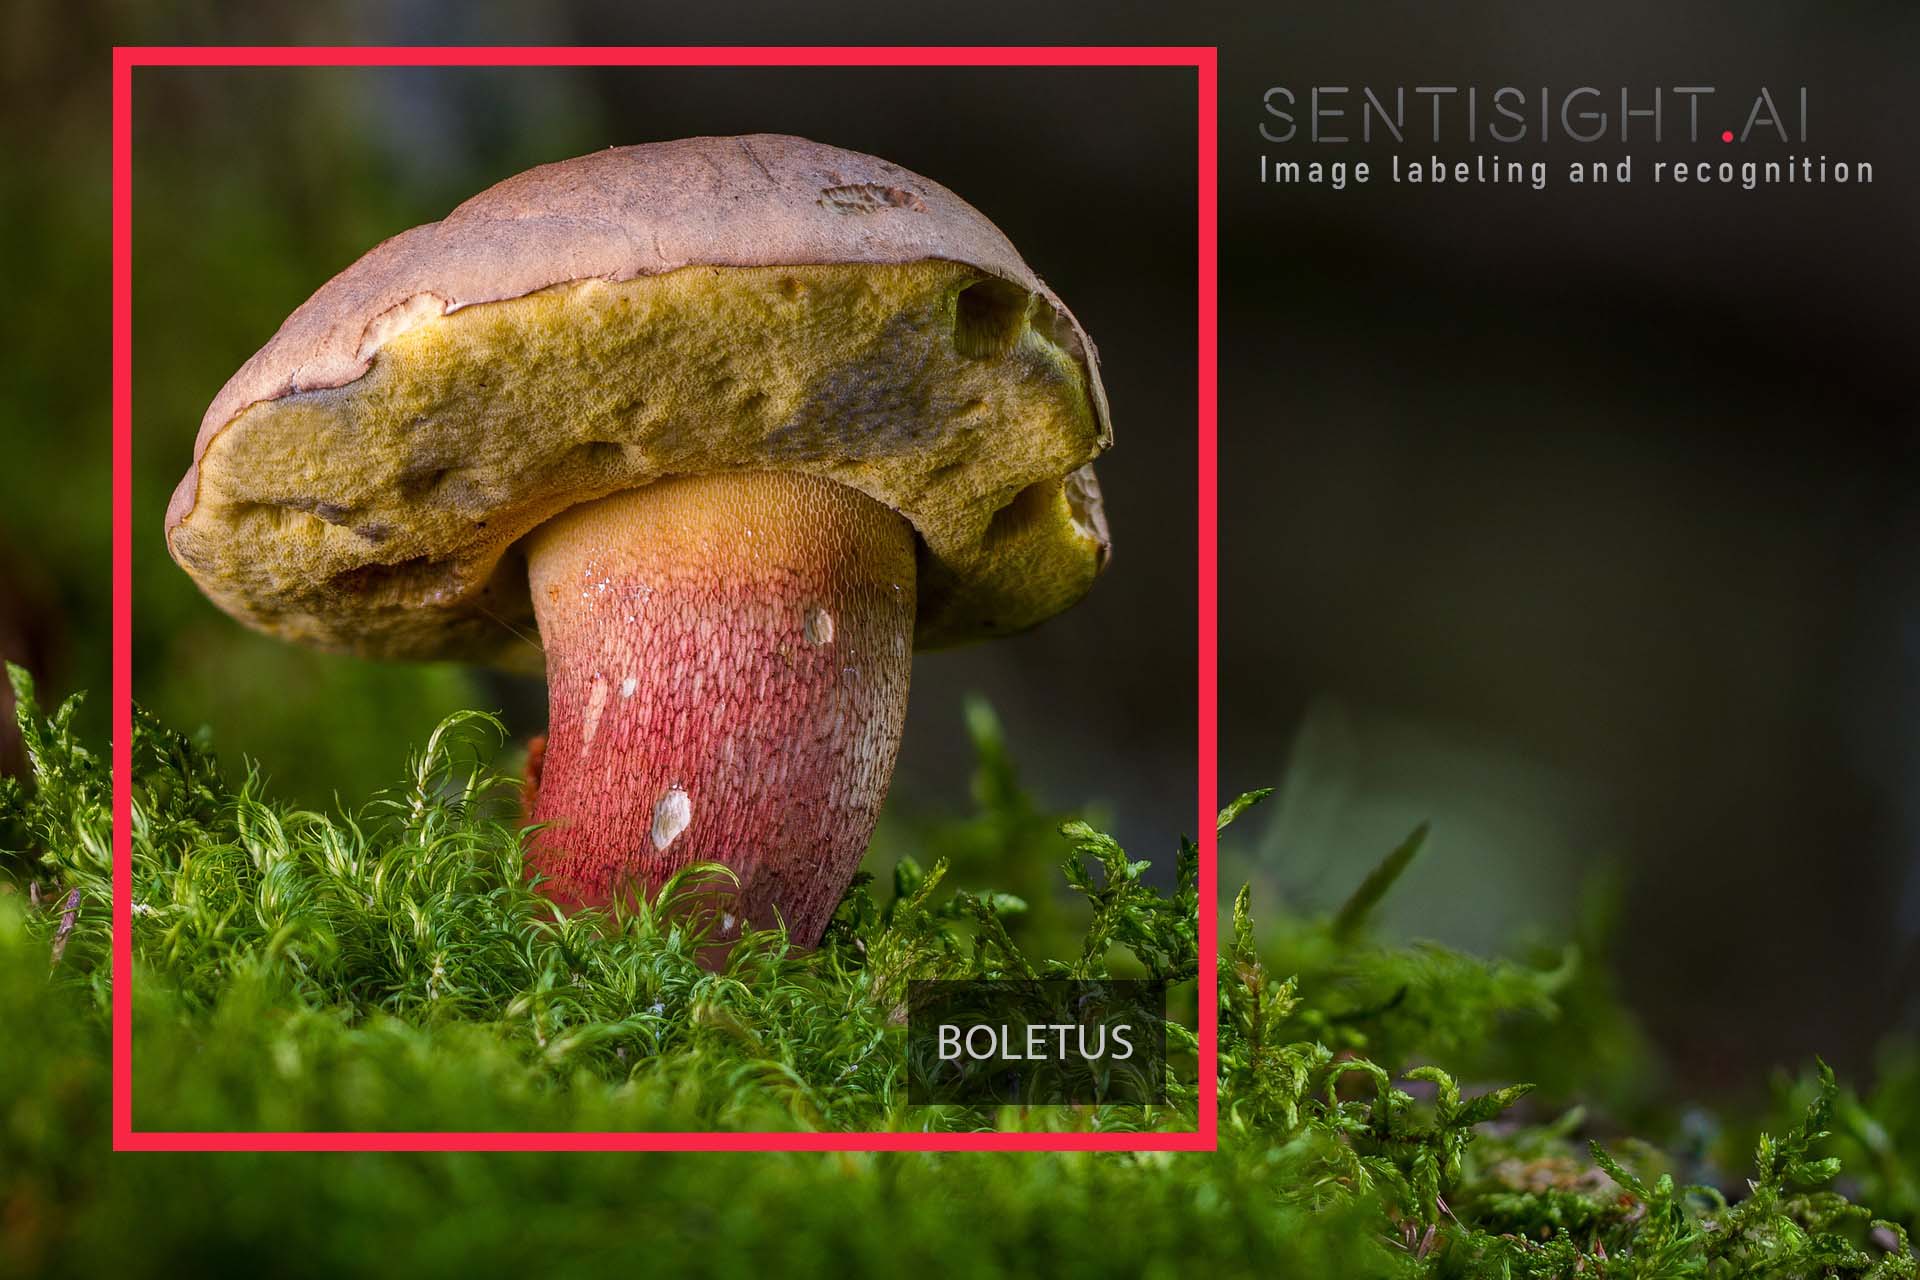 Object detection models example of wild mushroom.